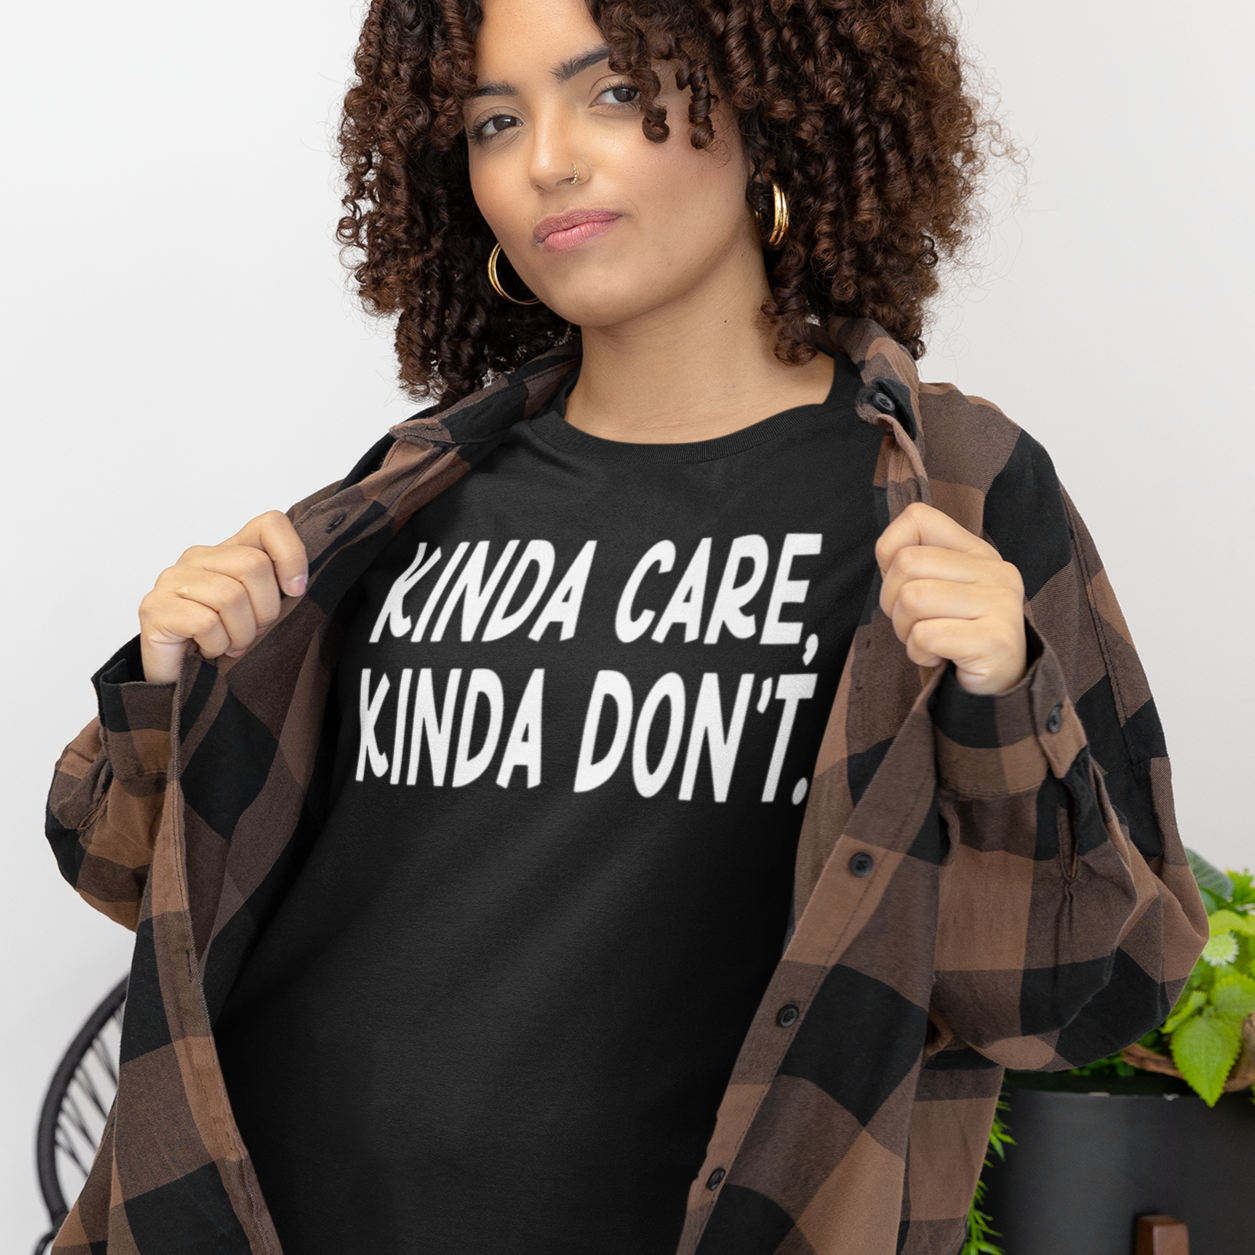 kinda-care-kinda-dont-bella-canvas-t-shirt-mockup-featuring-a-woman-with-curly-hair